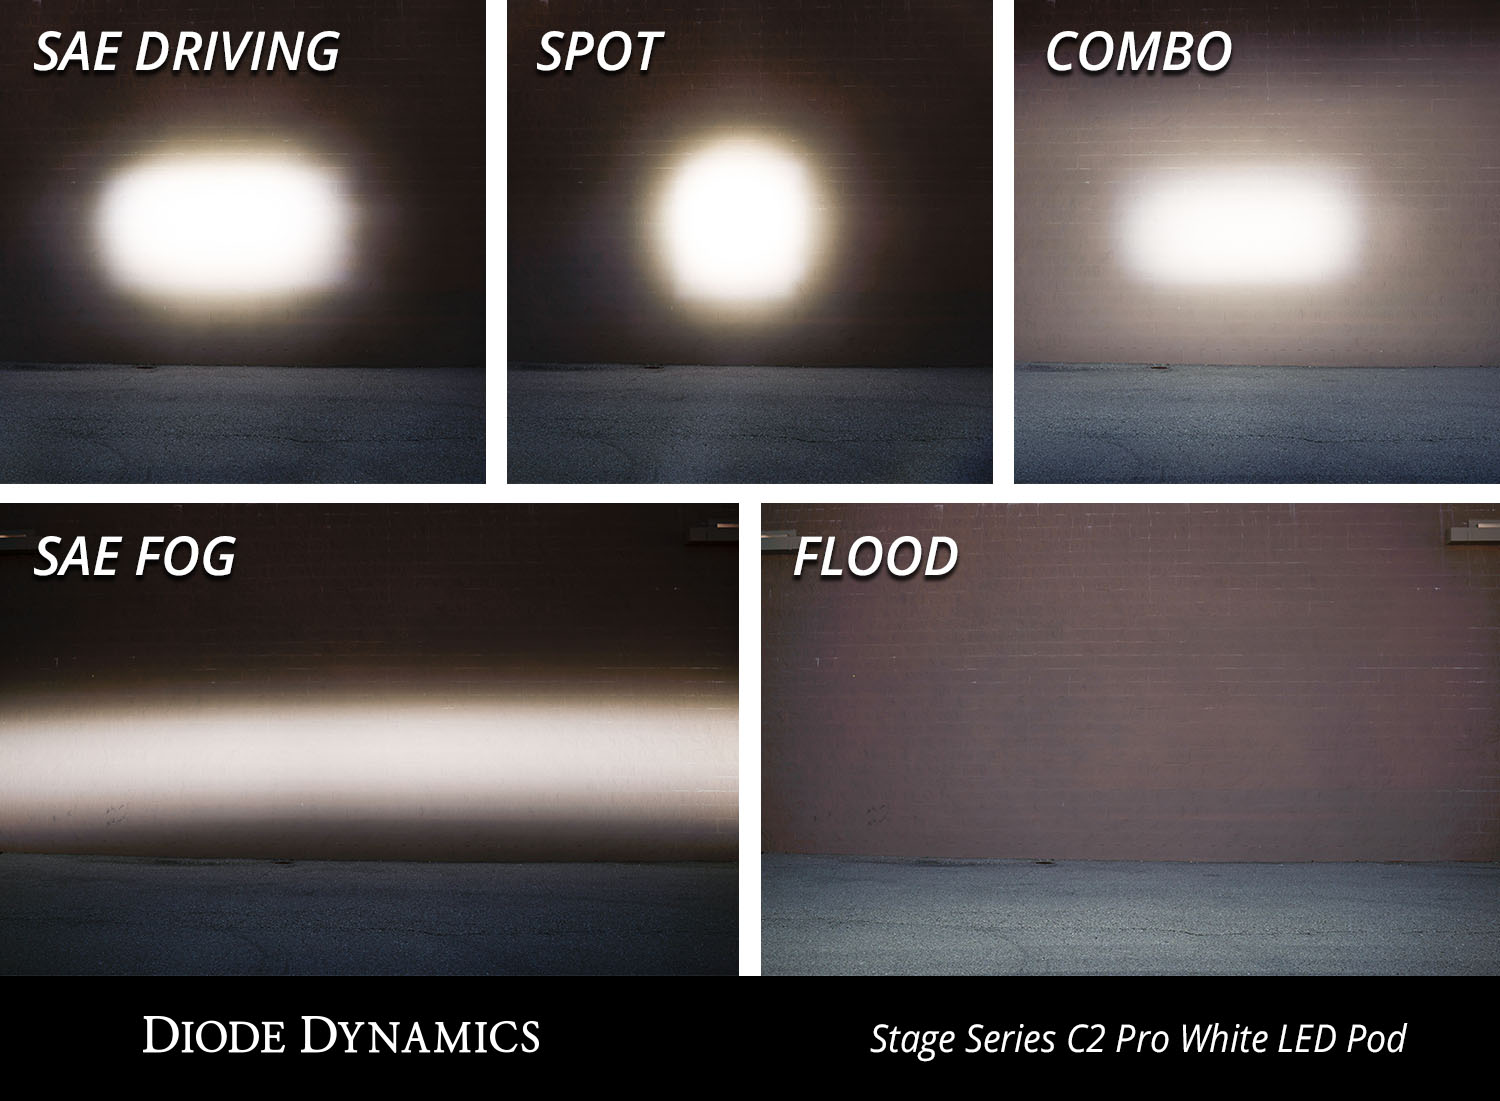 Diode Dynamics Stage Series 2 Inch LED Pod, Sport White Spot Standard ABL Pair